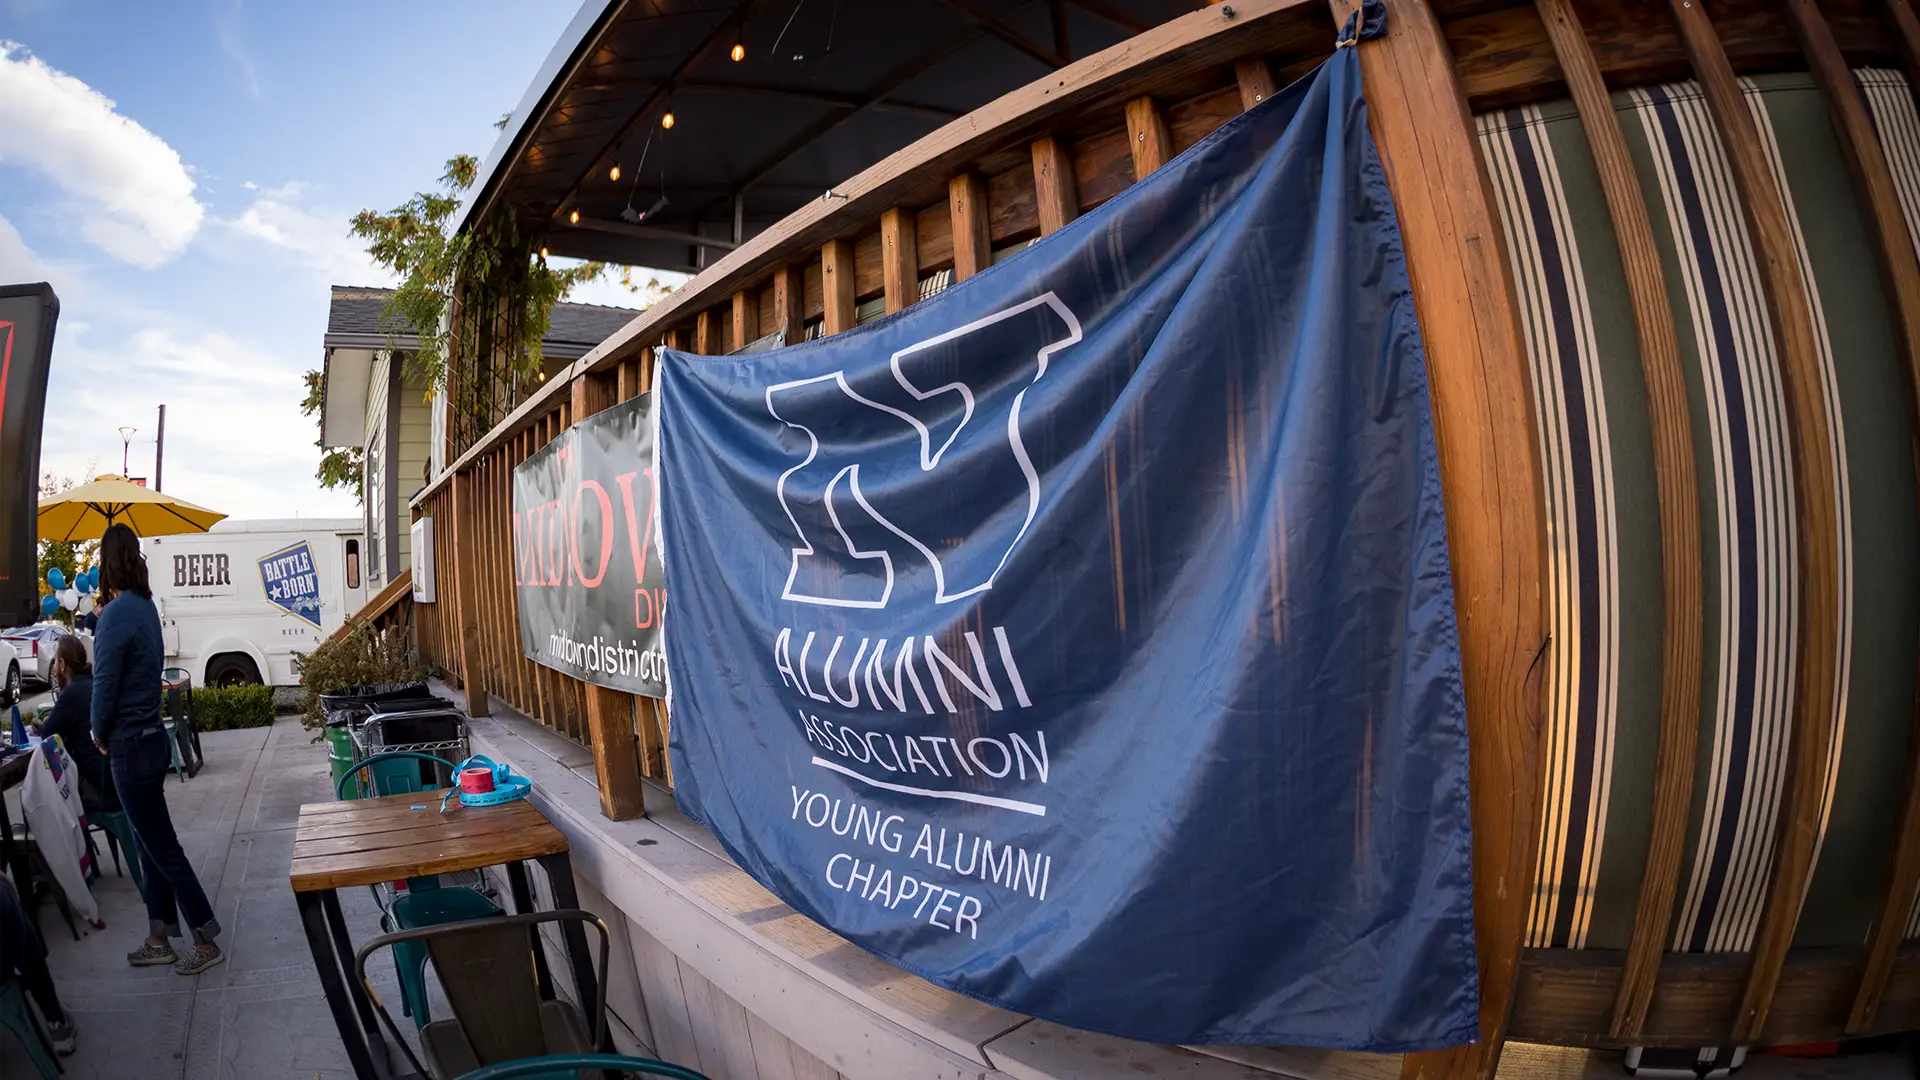 A banner with the Nevada Block N logo and the words "Young Alumni Chapter" hangs from a fence railing.